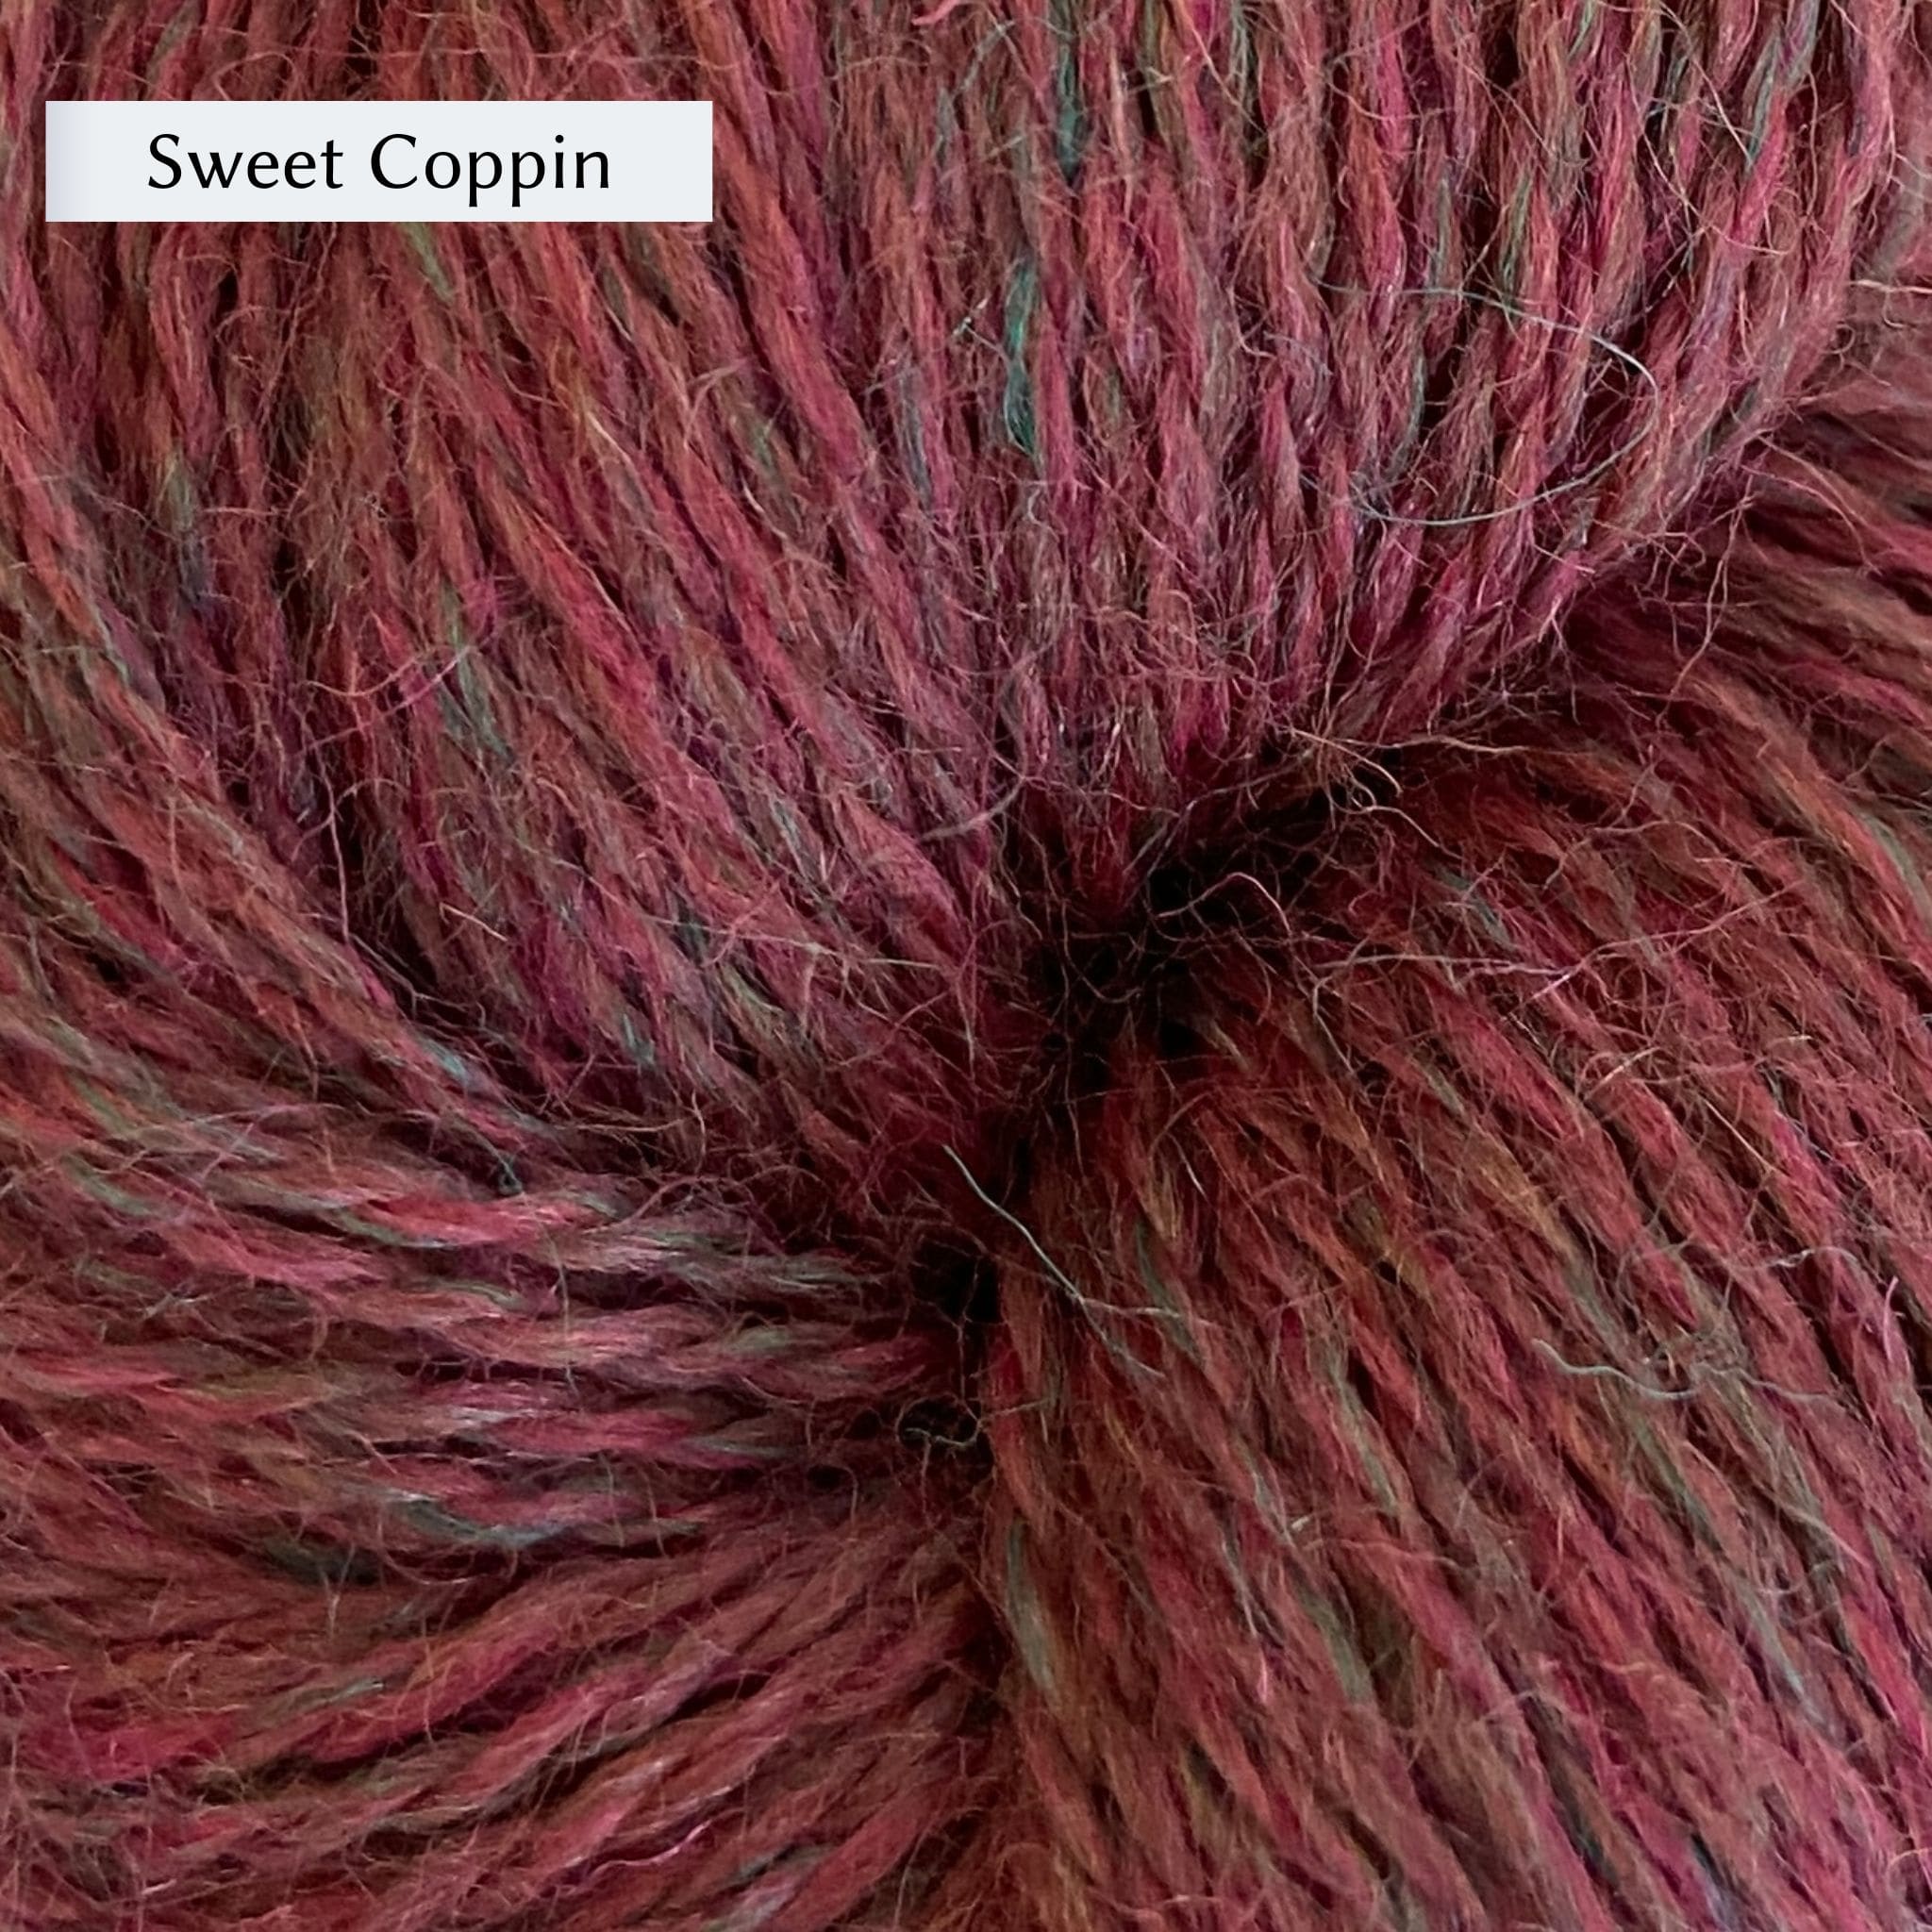 John Arbon Appledore DK, a DK weight British yarn, in color Sweet Coppin, a burgundry red with green heathering